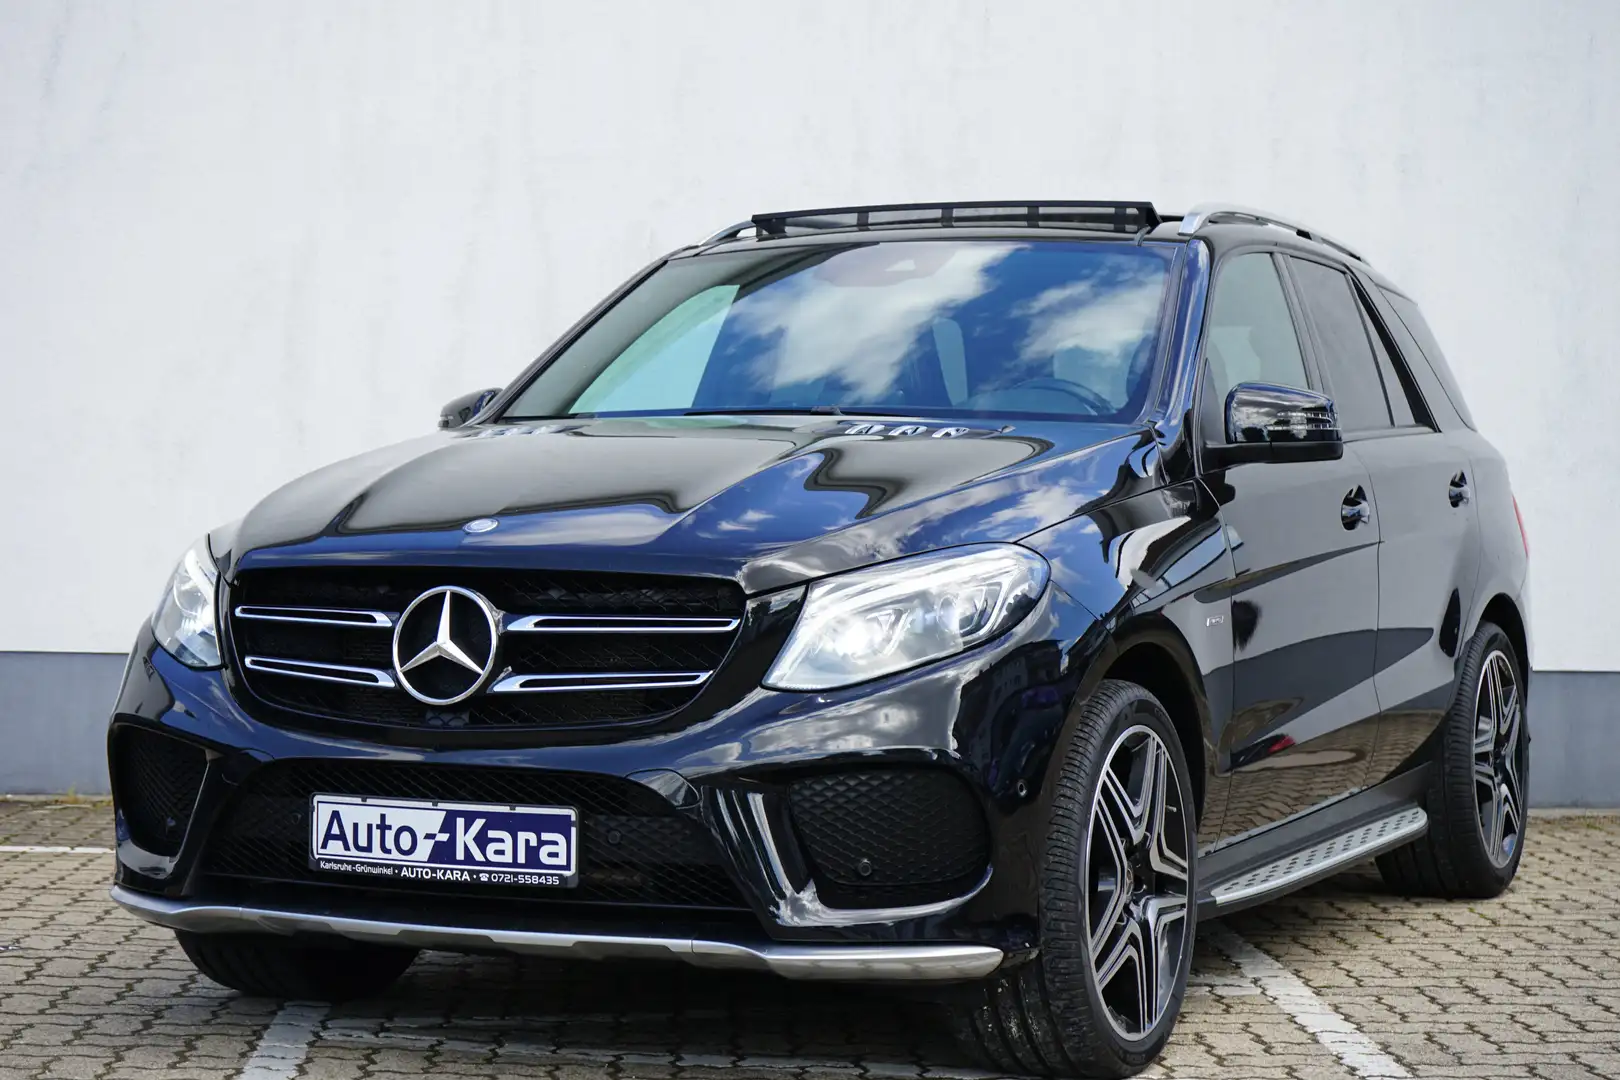 Mercedes-Benz GLE 450 4MATIC*21 Zoll*Panorama*LED ILS*Standheizung*Voll Czarny - 1